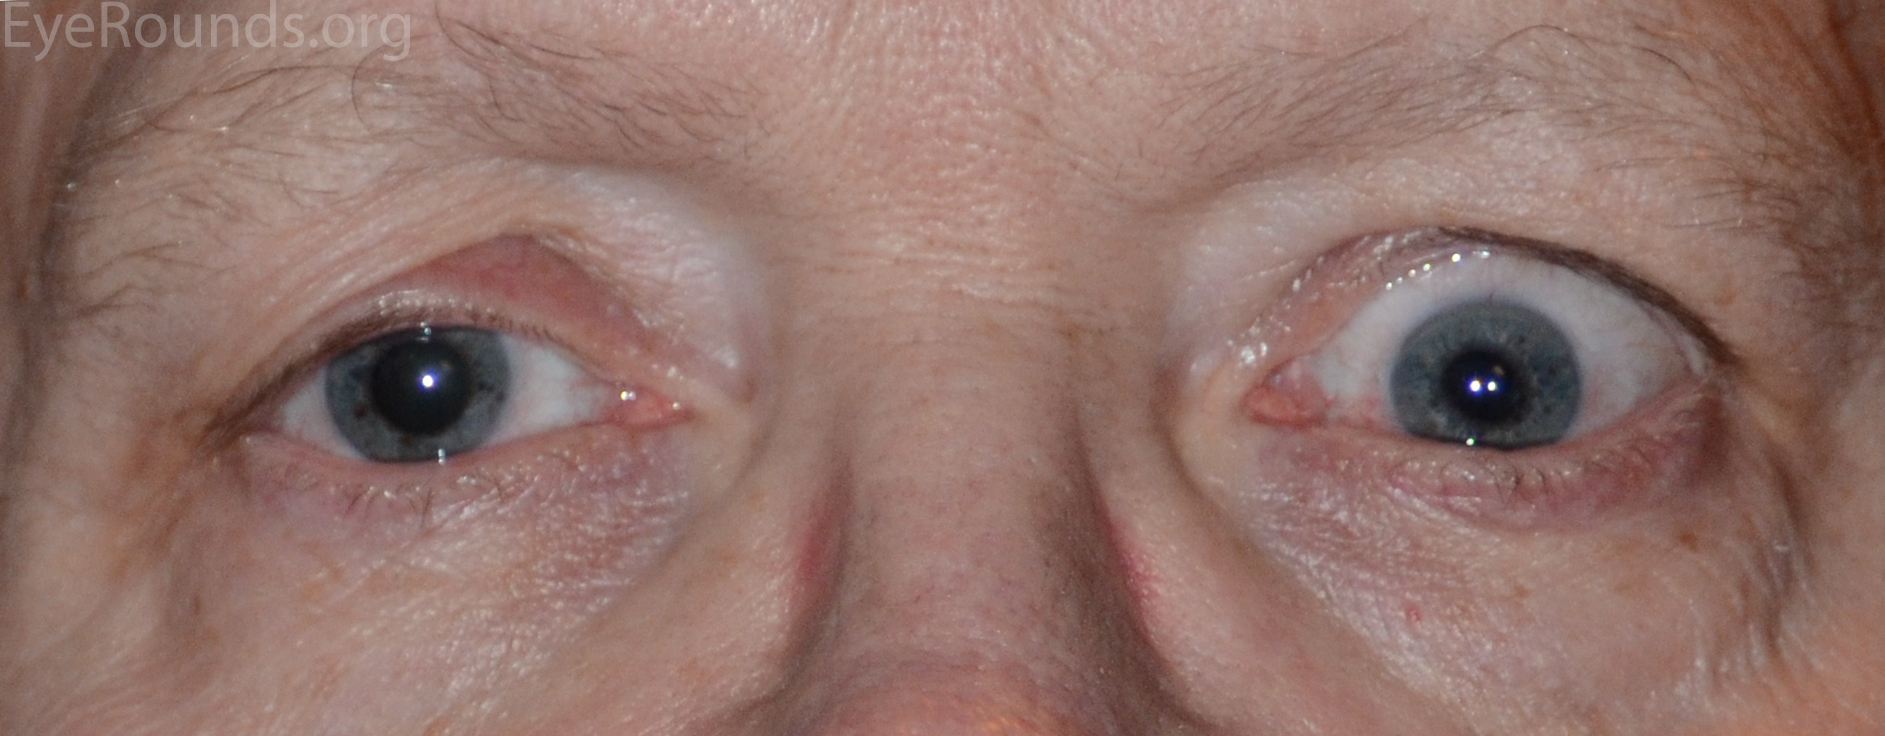 pseudoptosis in right eye due to lid retraction in the contralateral eye 